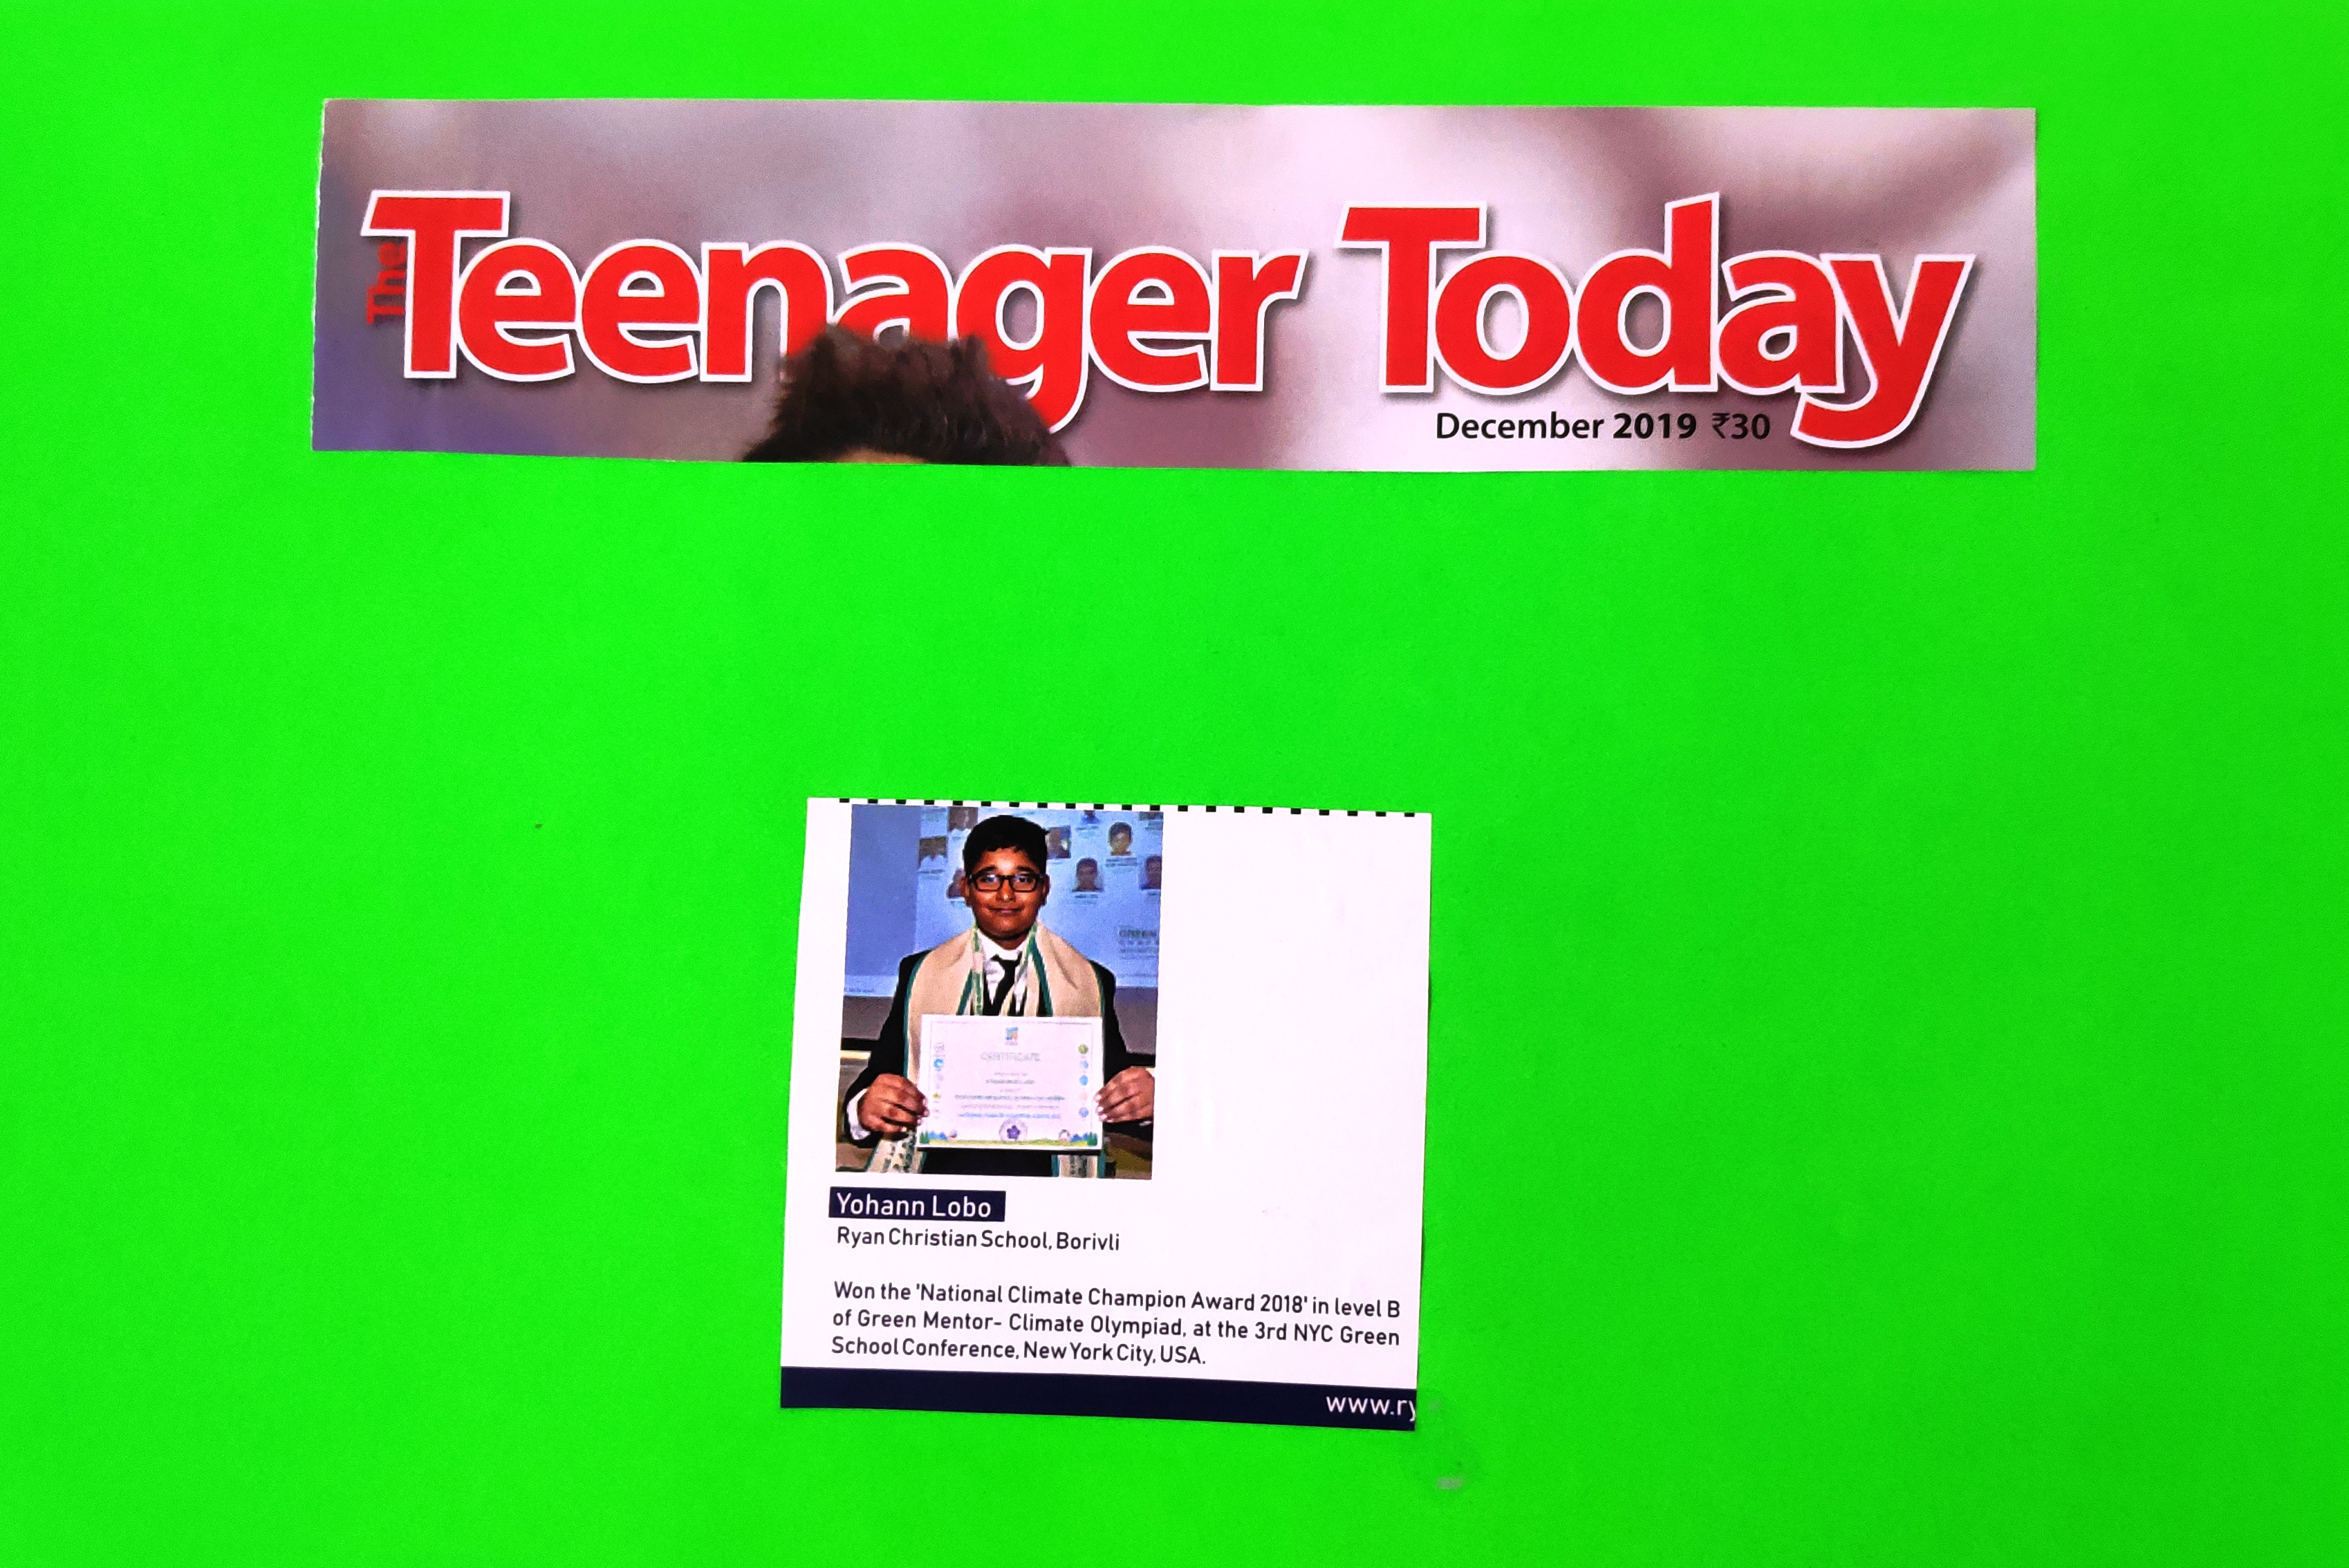 Mst Yohann Lobo ( National climate Award) was featured in Teenager Today